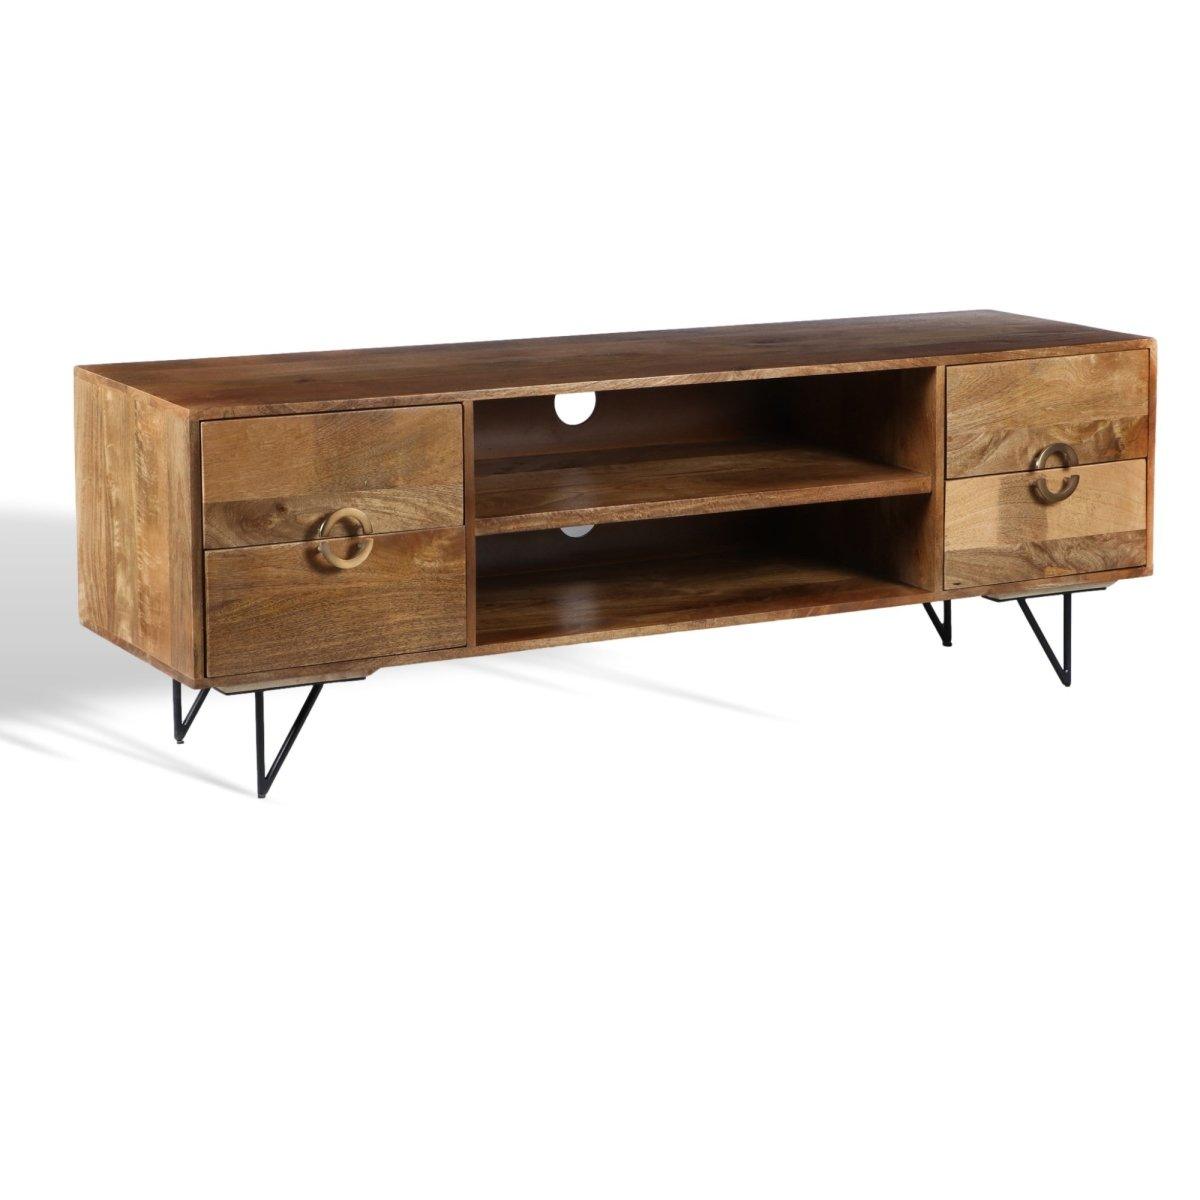 Ostro Mango Wood TV Stand with drawers - Rustic Furniture Outlet